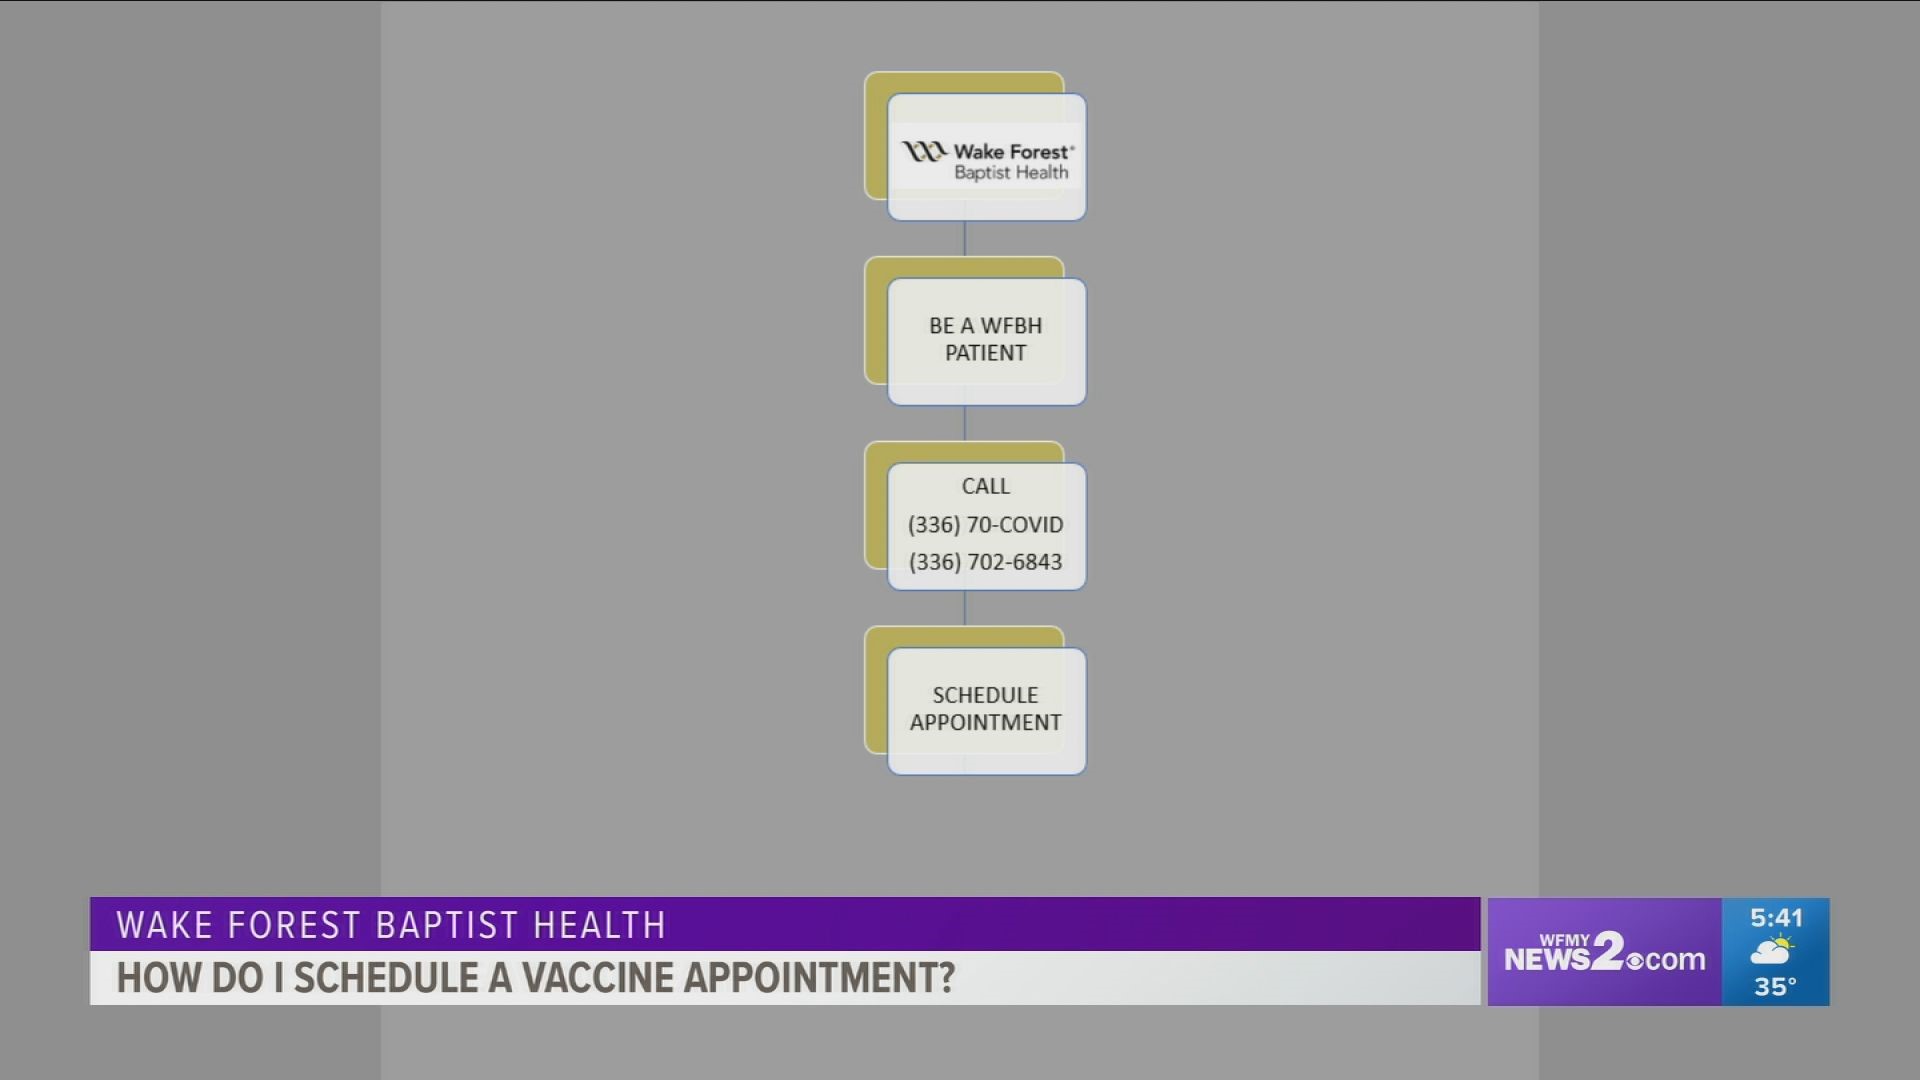 Tanya Rivera walks through the process of making a COVID-19 vaccine appointment with Wake Forest Baptist Health.